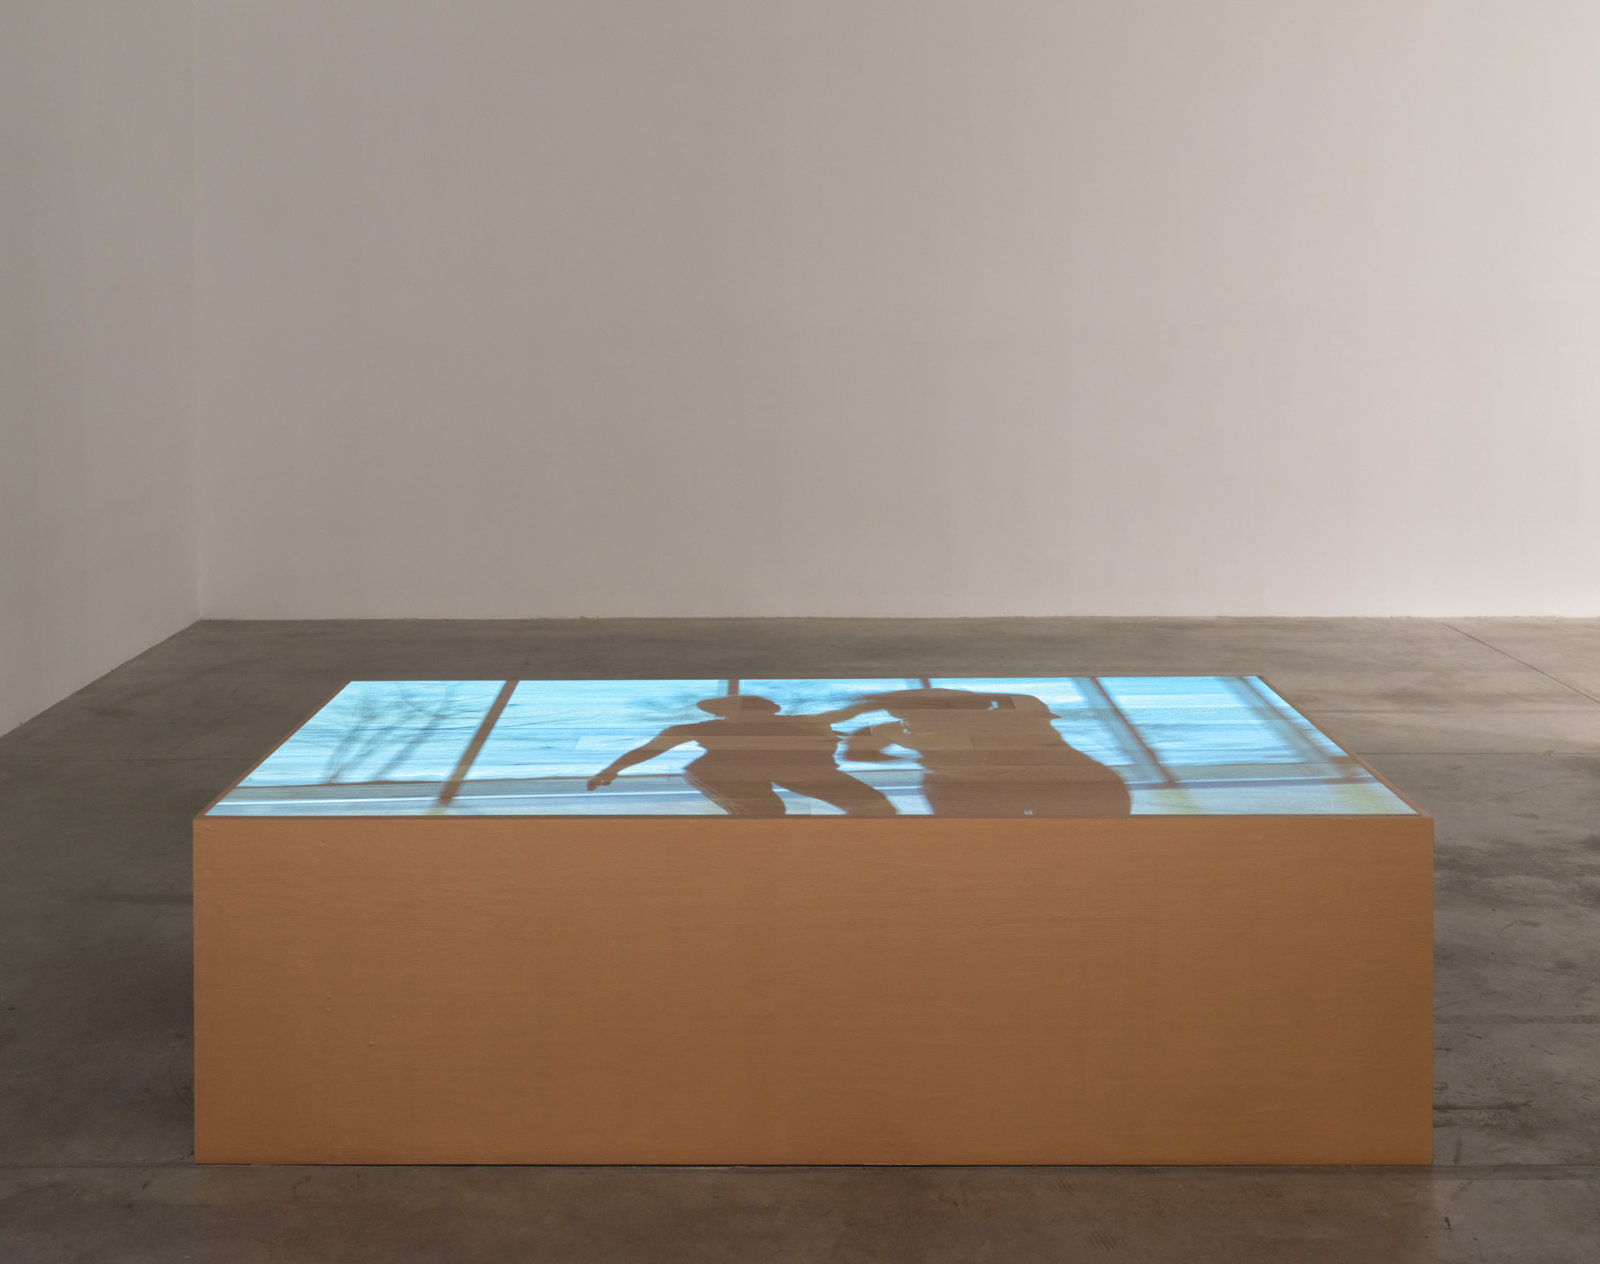 Tanya Lukin Linklater, We wear one another, 2019⁠, site-specific performance projected on wood plinth, 48 x 24 x 85 in. (122 x 61 x 216 cm), 25 minutes, 18 seconds. Installation view, Soundings, Morris and Helen Belkin Art Gallery, Vancouver, 2020